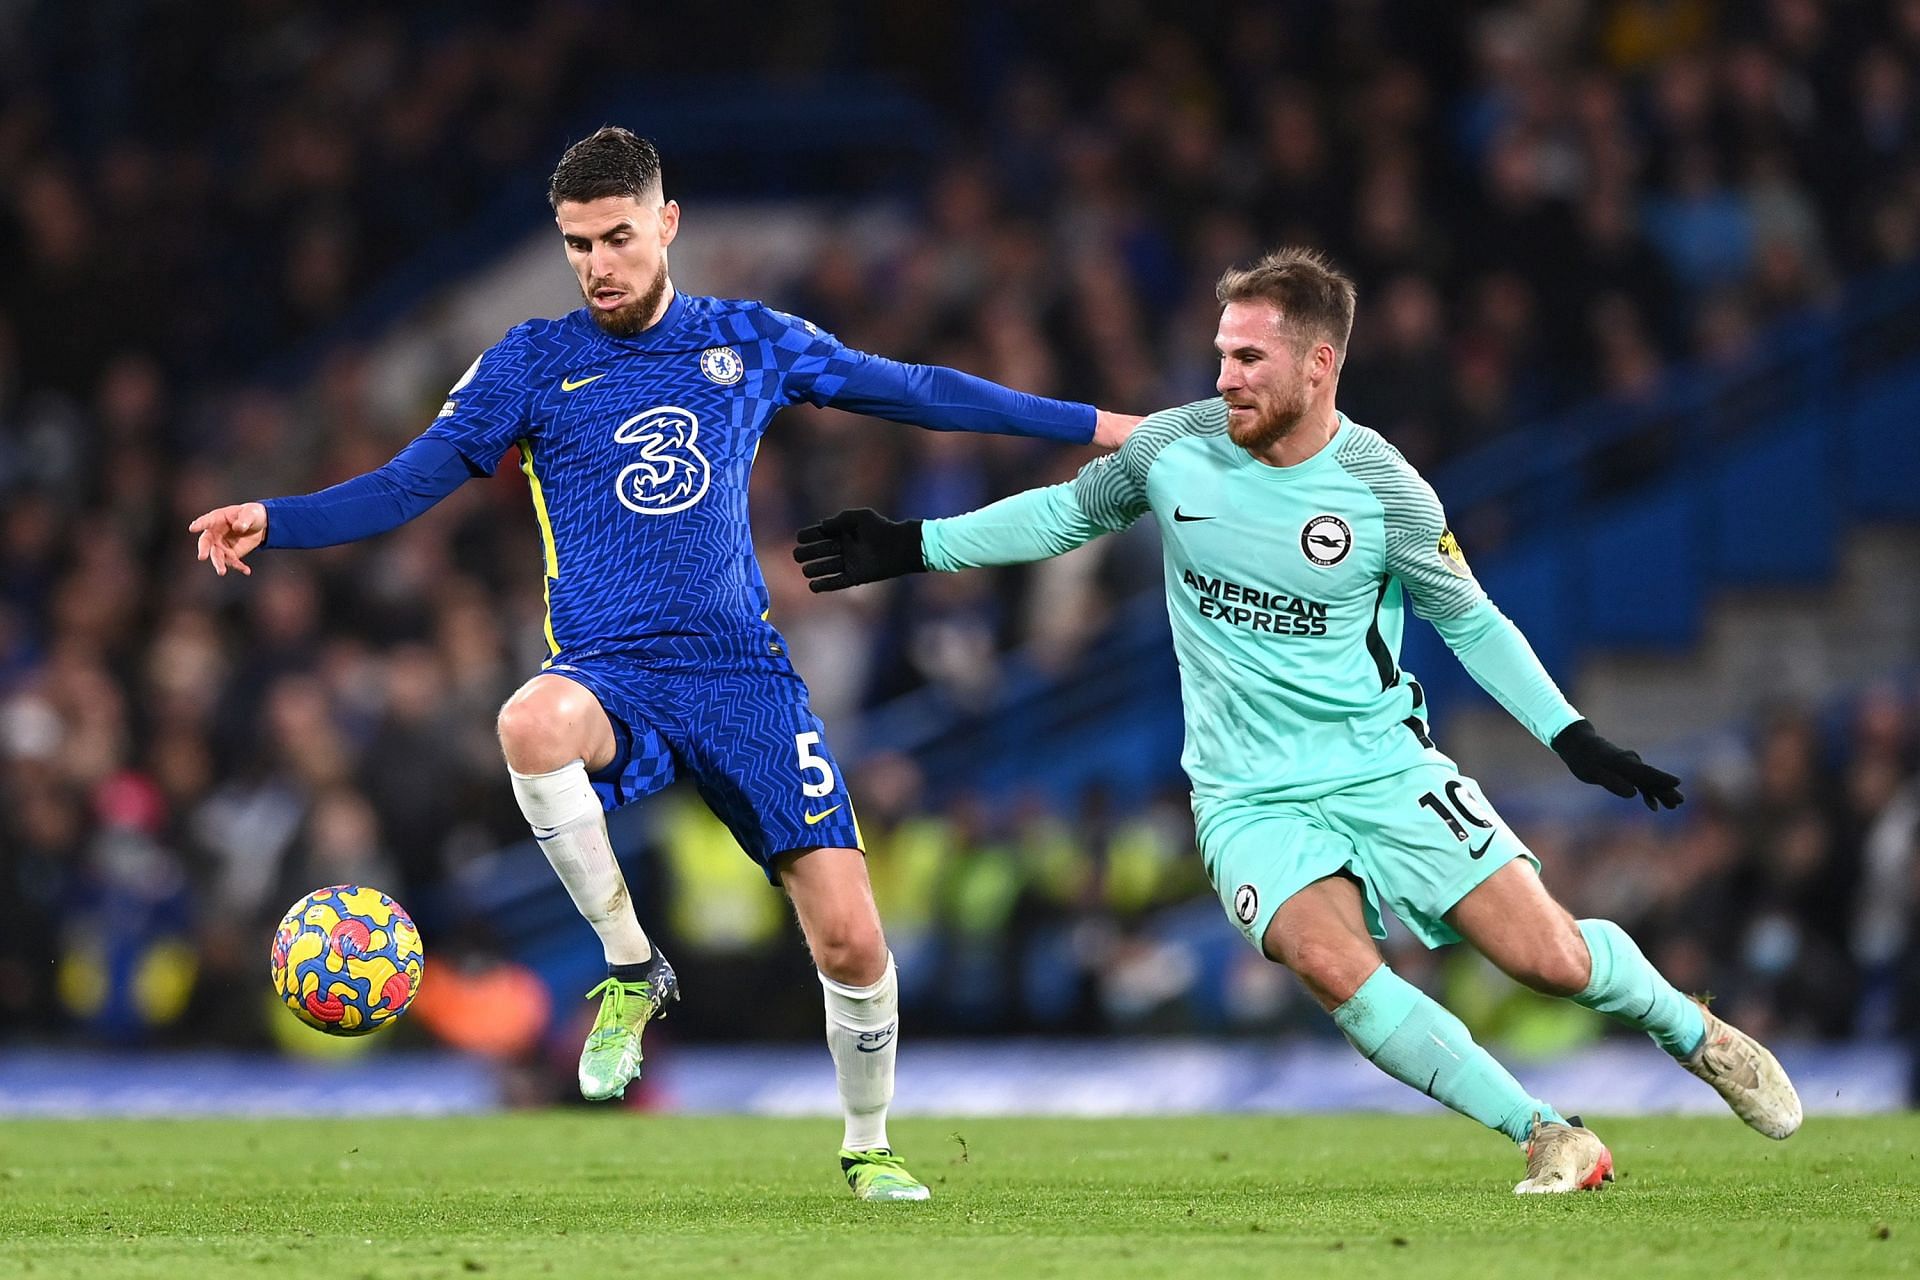 Jorginho (left) put in a polished performance in the Chelsea midfield